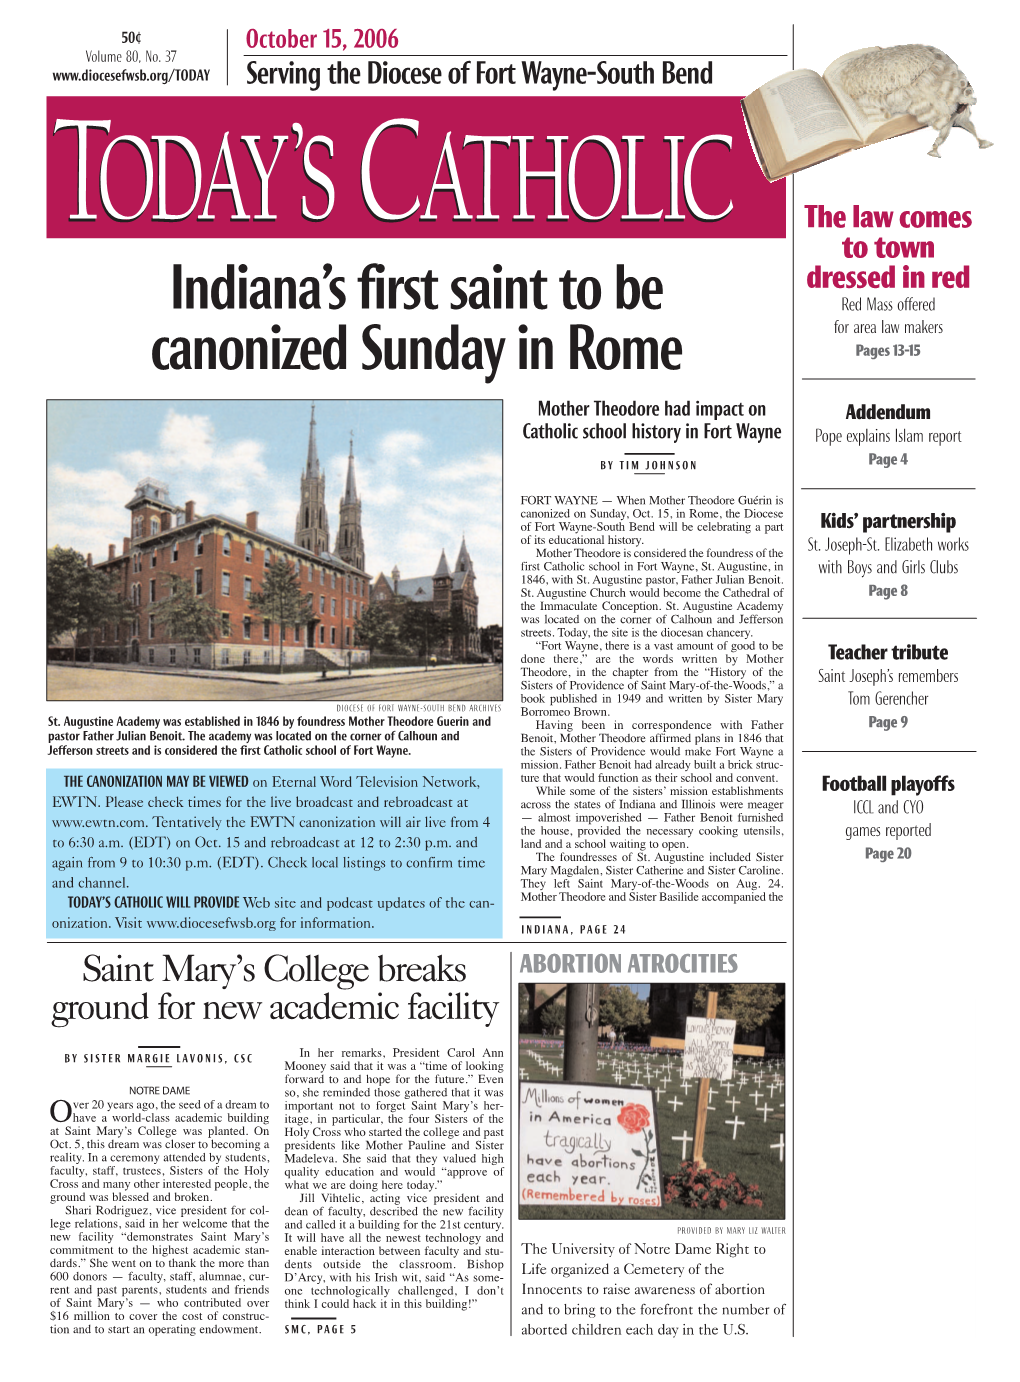 Indiana's First Saint to Be Canonized Sunday in Rome